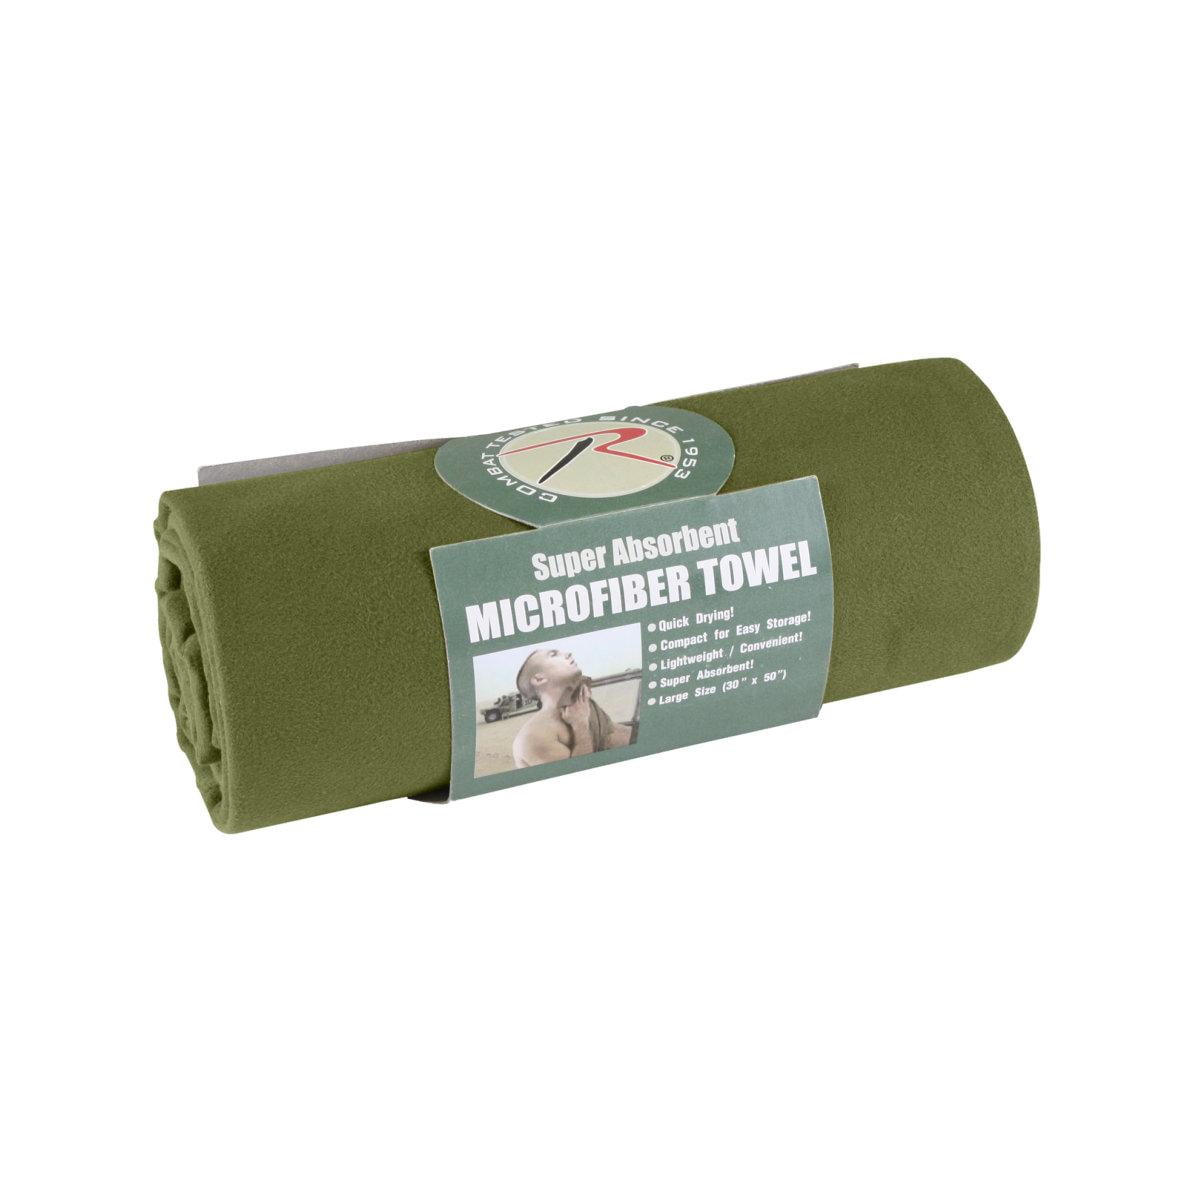 Microfiber Towel Quick Drying Absorbent Antibacterial Lightweight Packable Army 